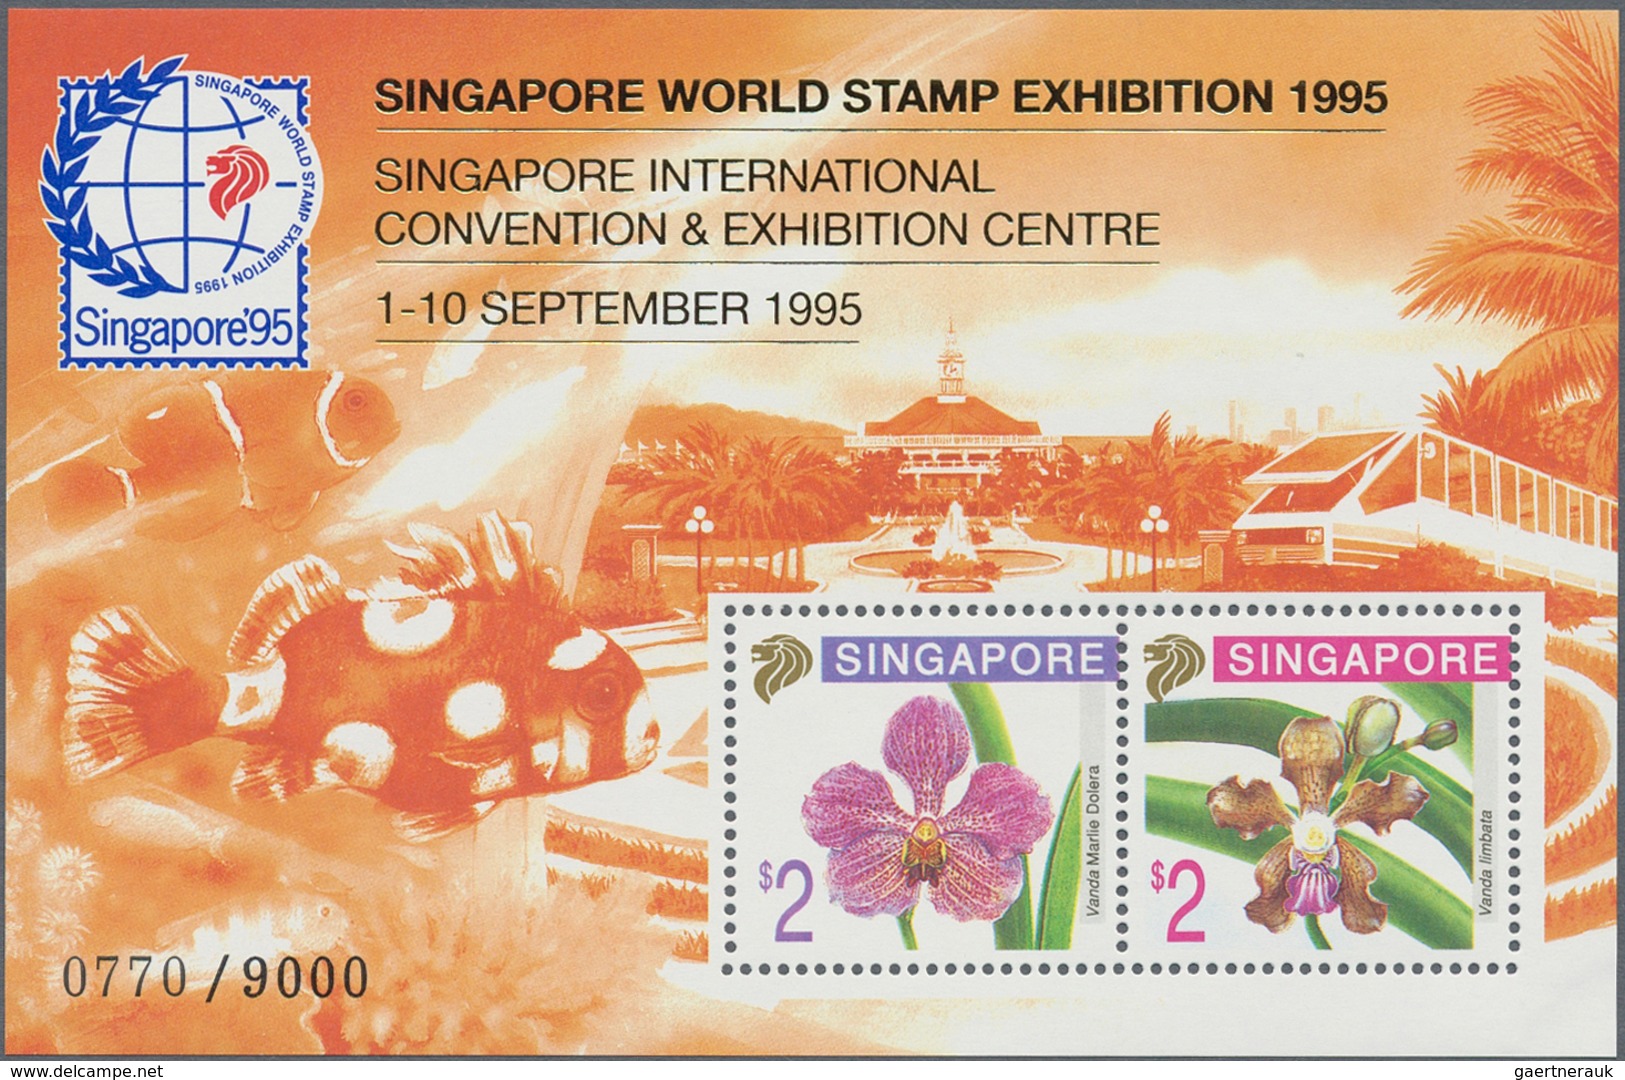 Singapur: 1995 Four 'Orchids' Miniature Sheets, Even Two Of The Orange One And The Larger Size 'Proo - Singapore (...-1959)